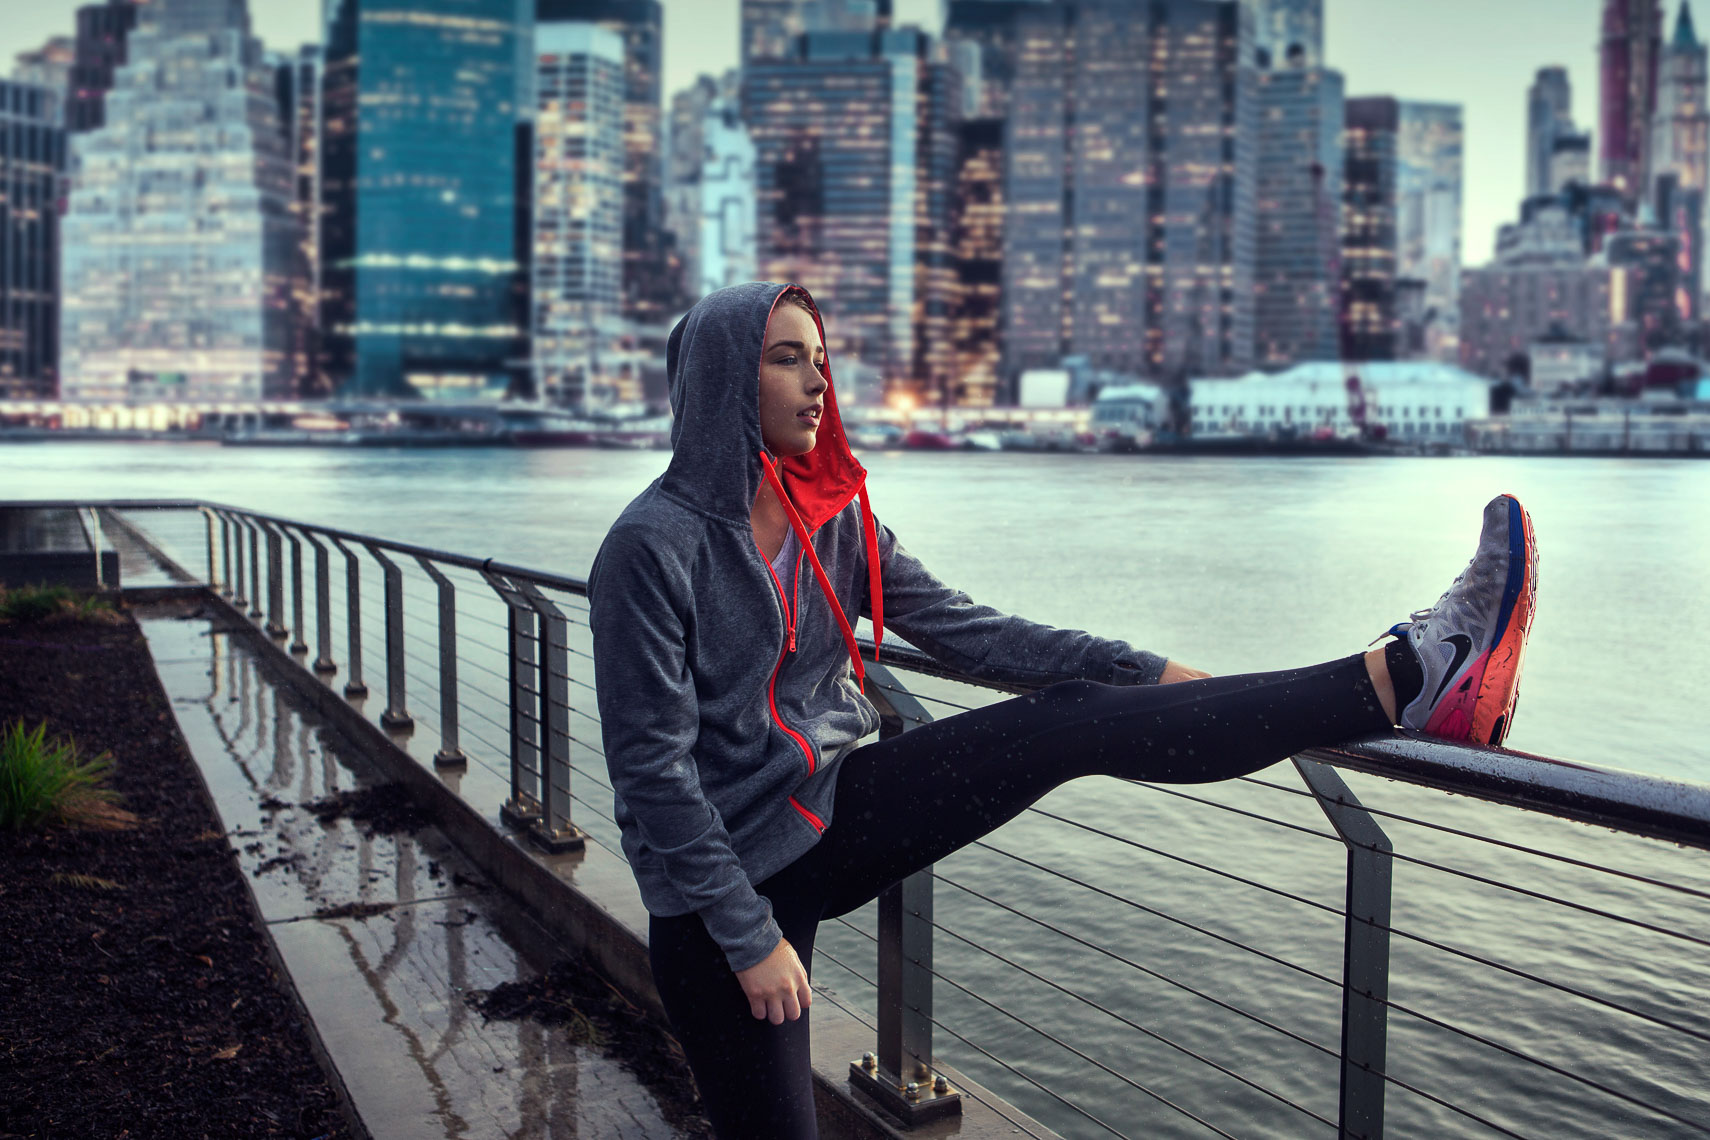 A girl exercising in New York City on a lifestyle photoshoot for an advertising agency 